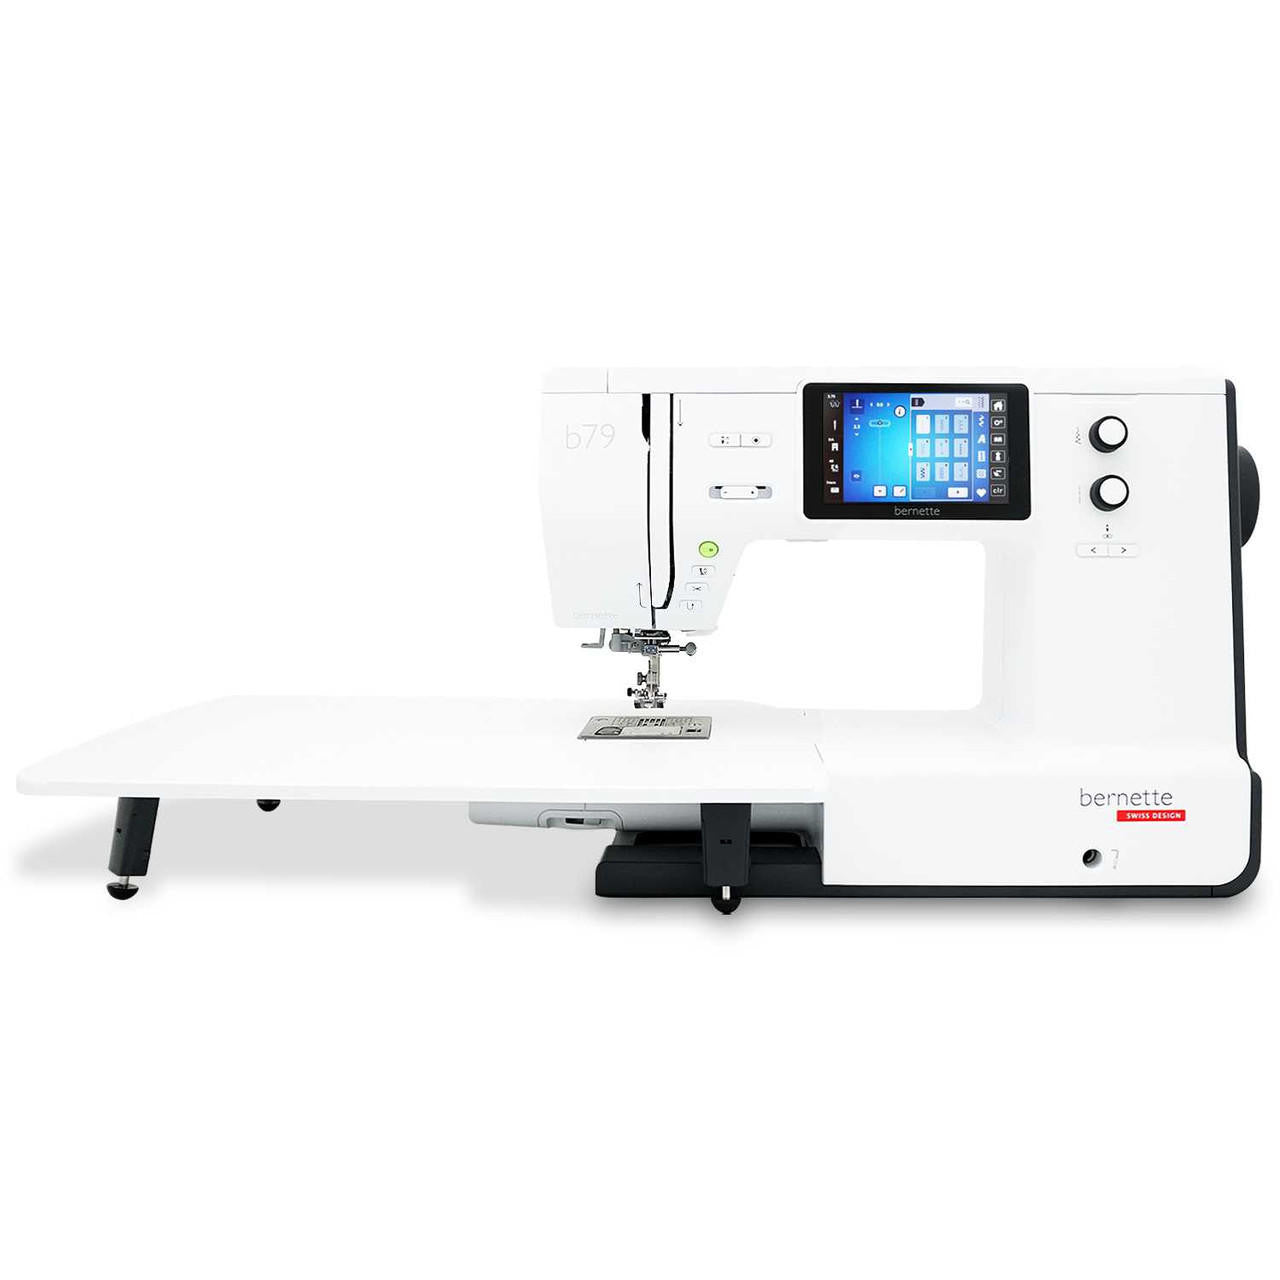 *PRE-ORDER* bernette 79 Sewing and Embroidery Machine